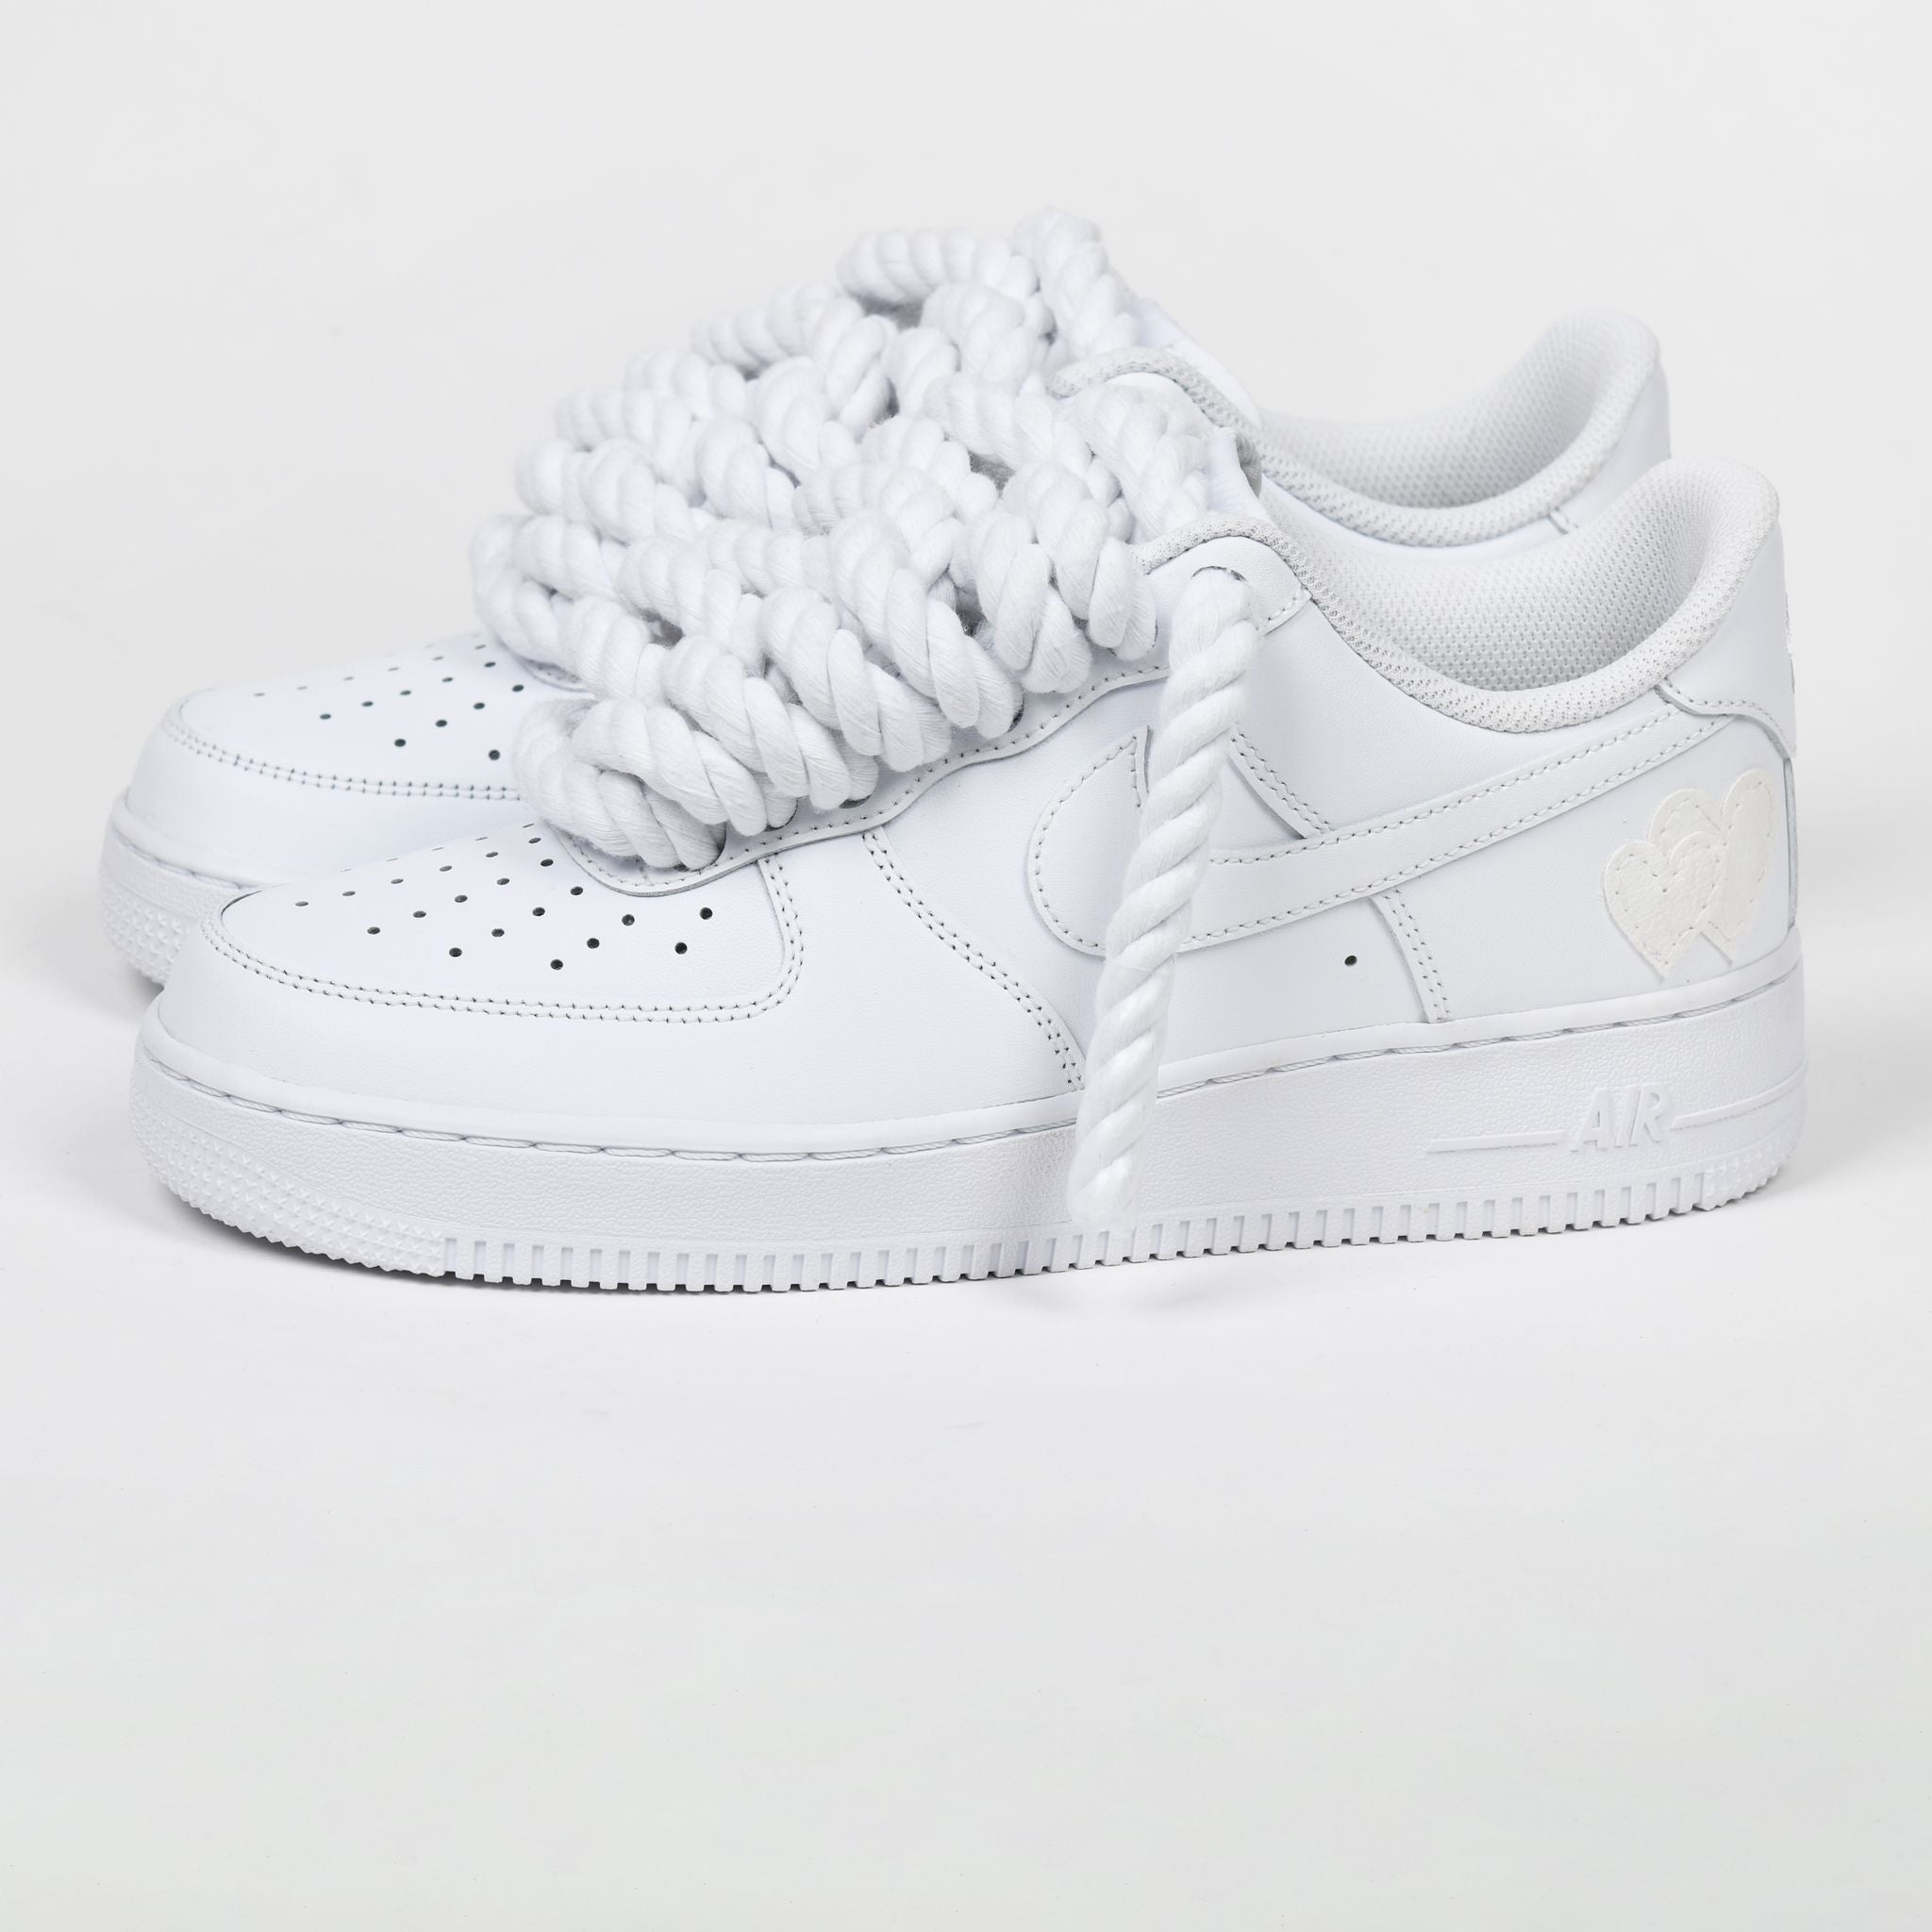 Nike Air Force 1 Low With Black Rope Laces White UNISEX Custom Shoes All  Sizes